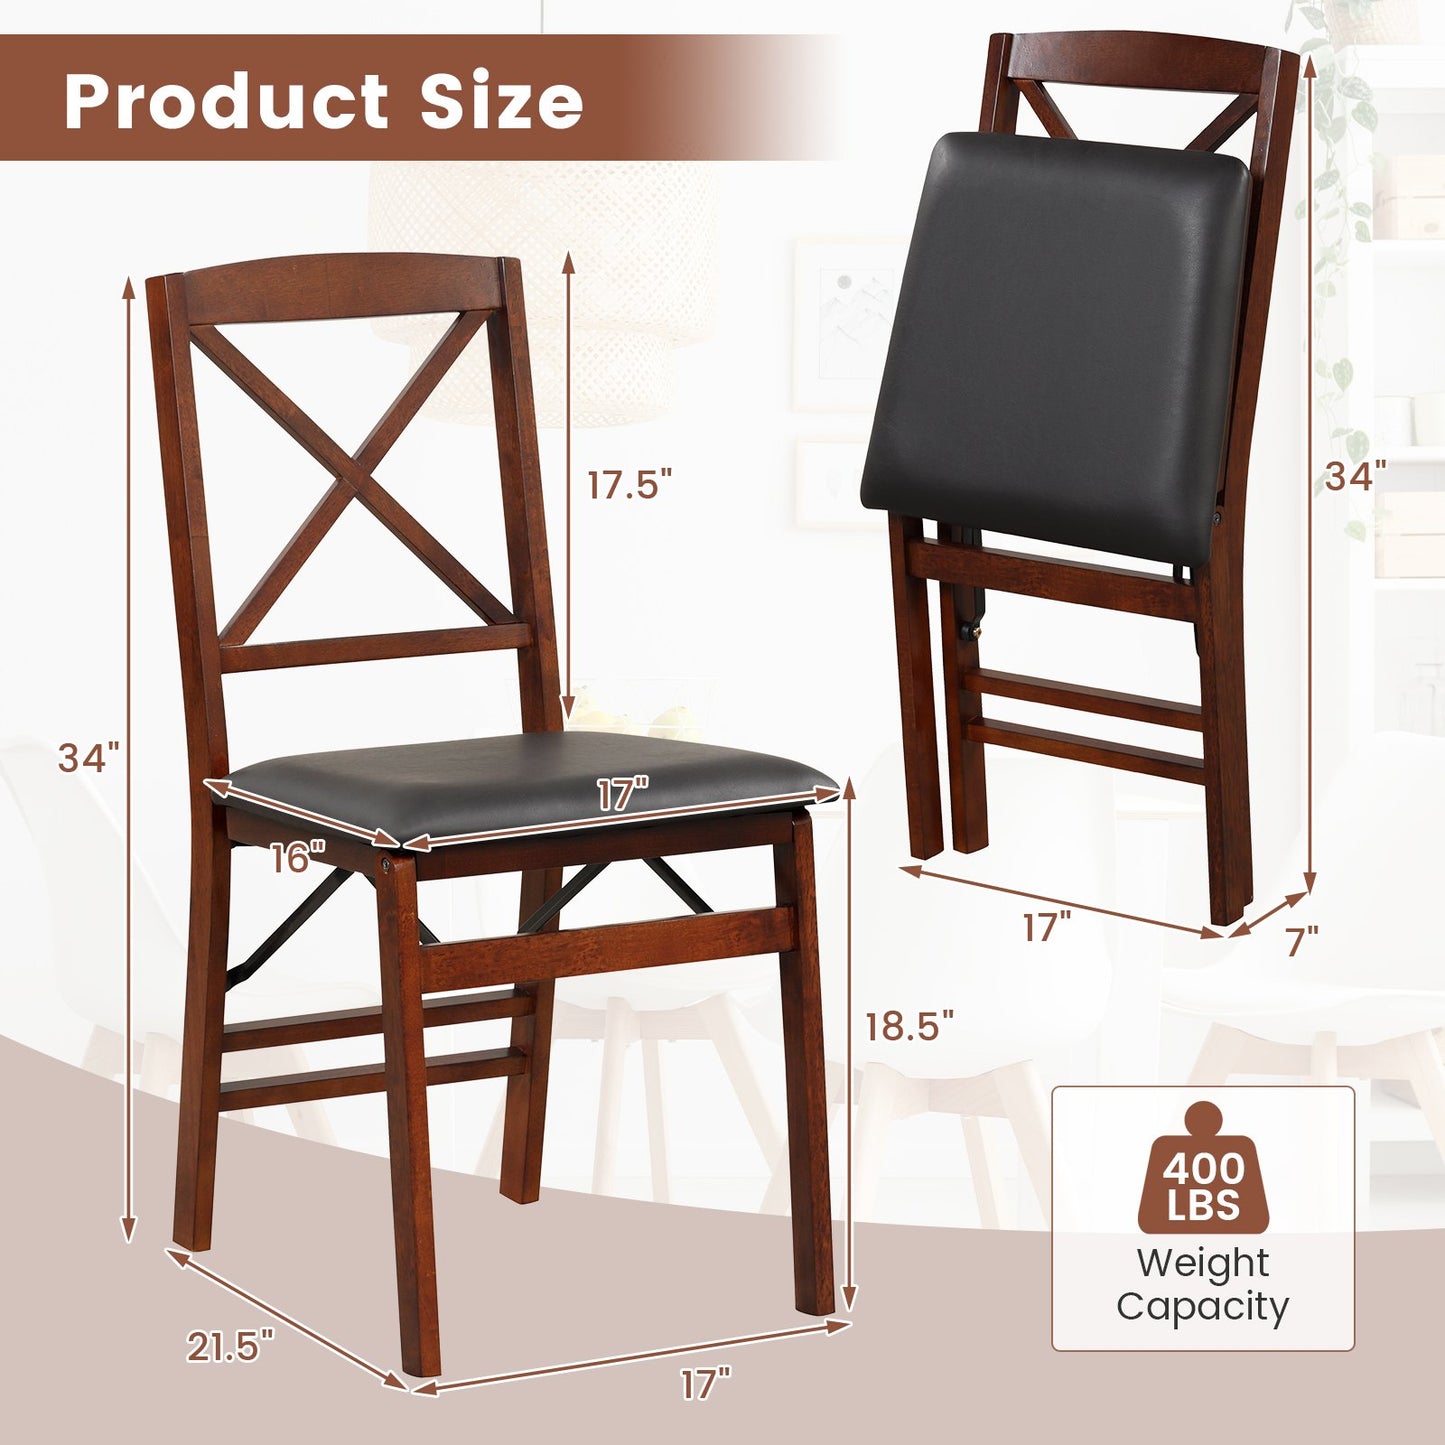 Set of 2 Folding Dining Chairs with 400 LBS Capacity, Brown